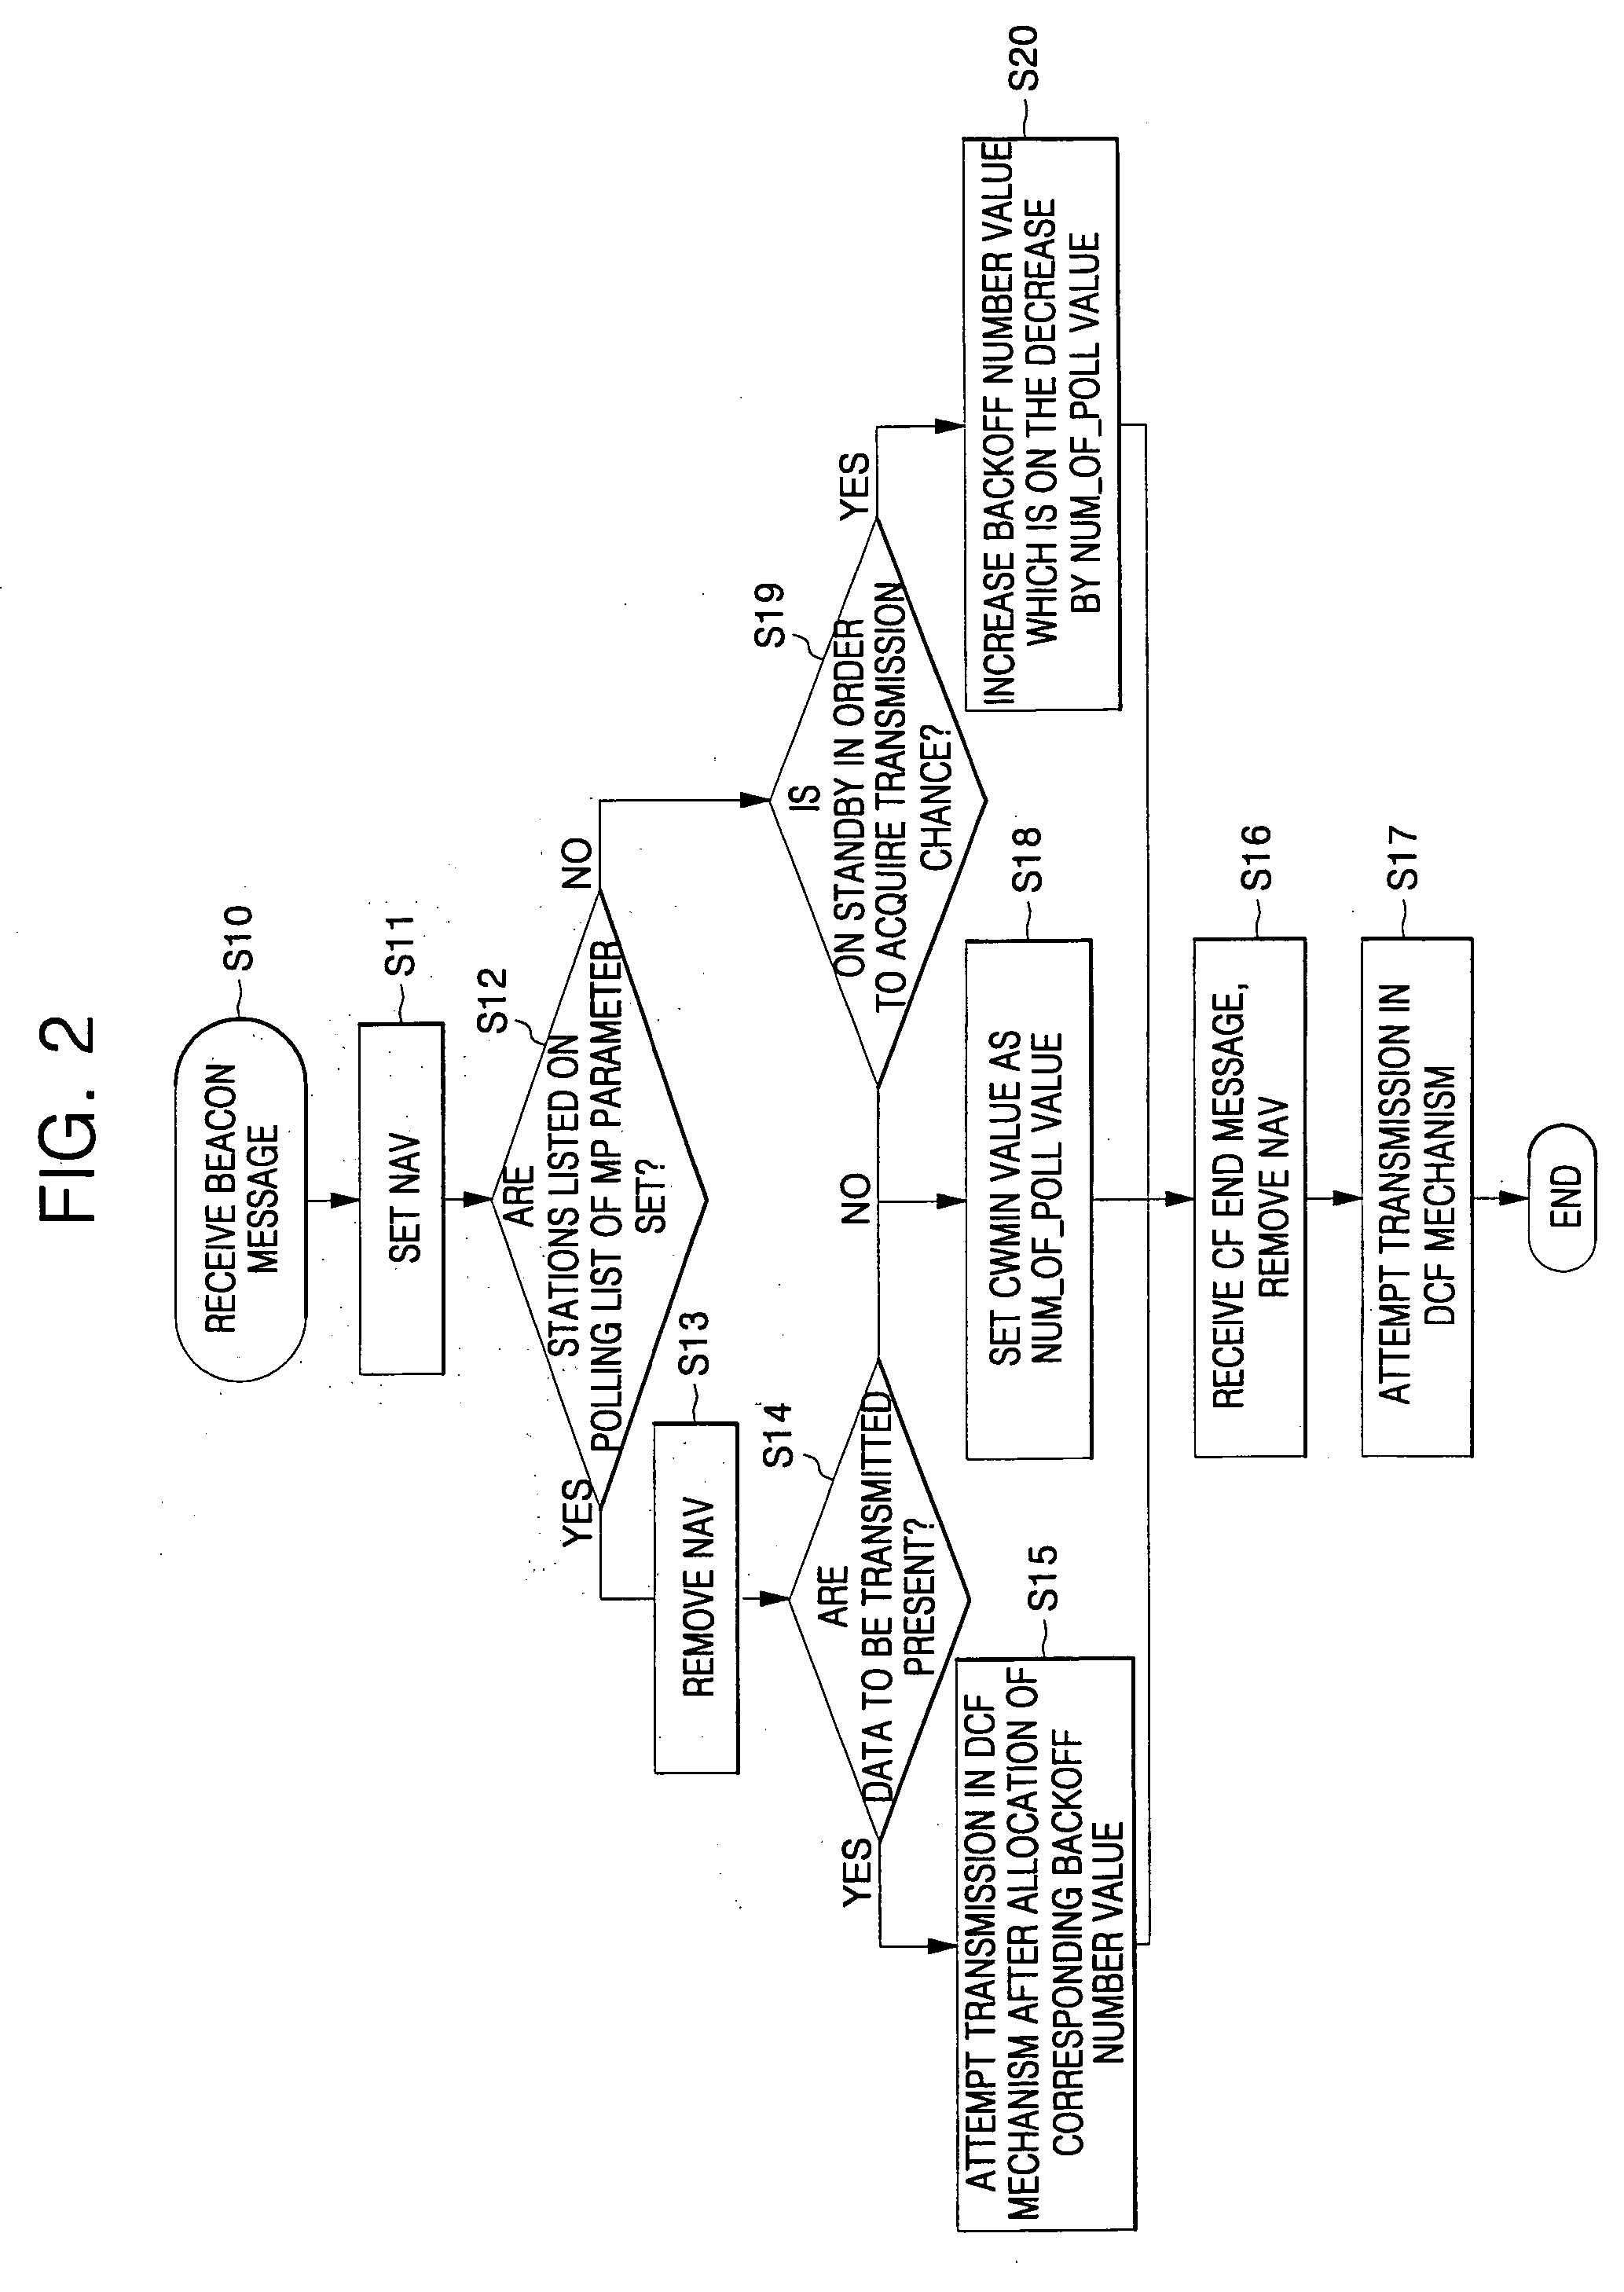 Medium access method for contention and non-contention